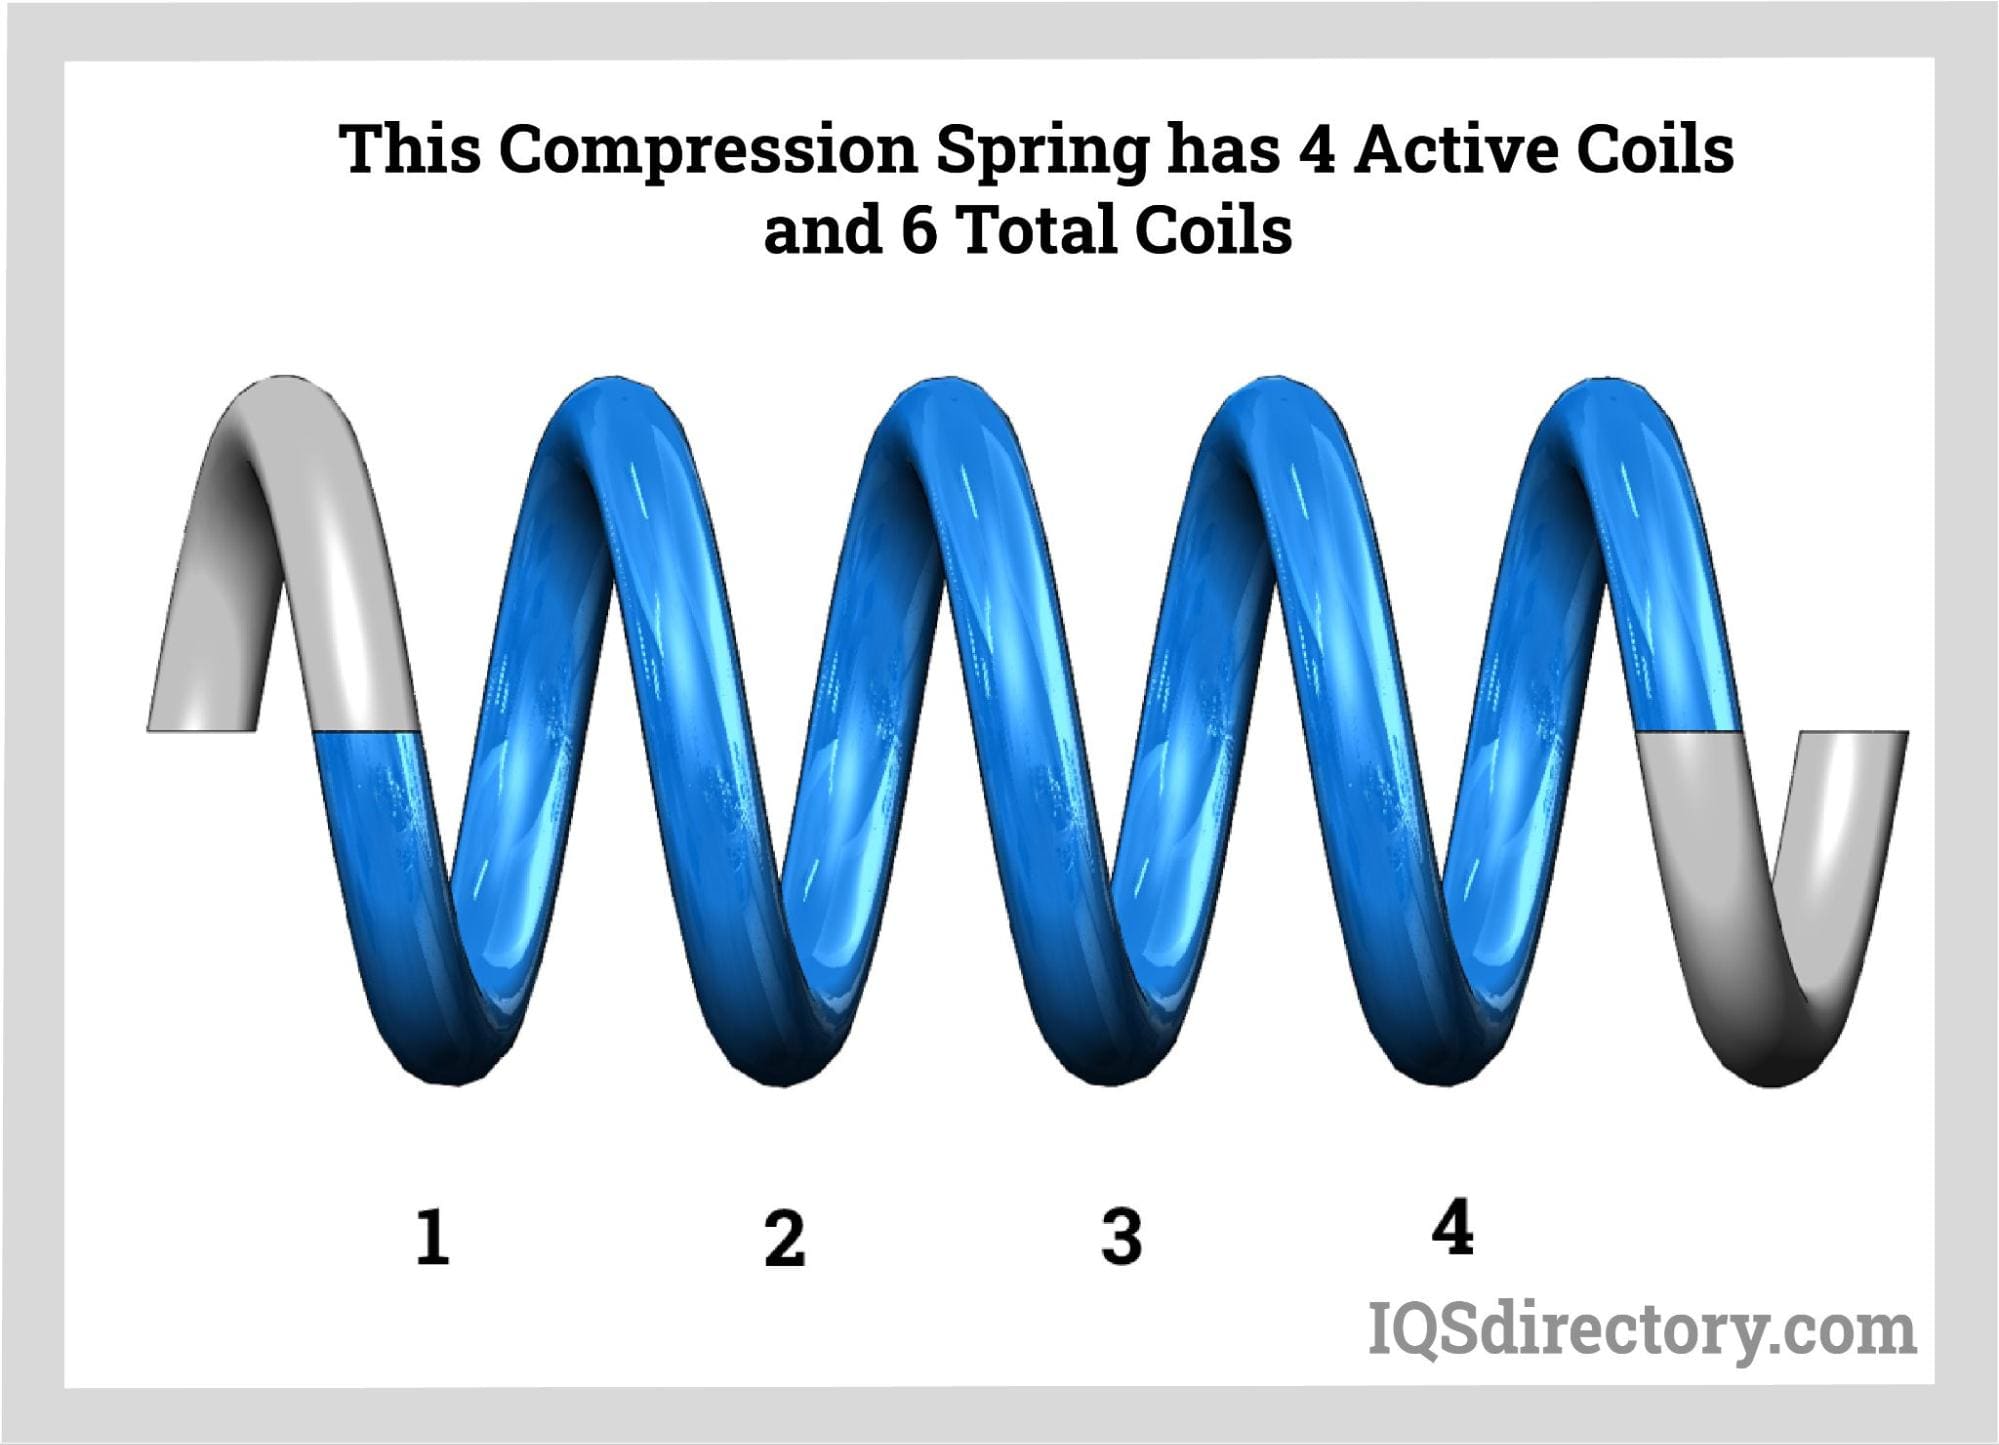 This Compression Spring has 4 Active Coils and 6 Total Coils